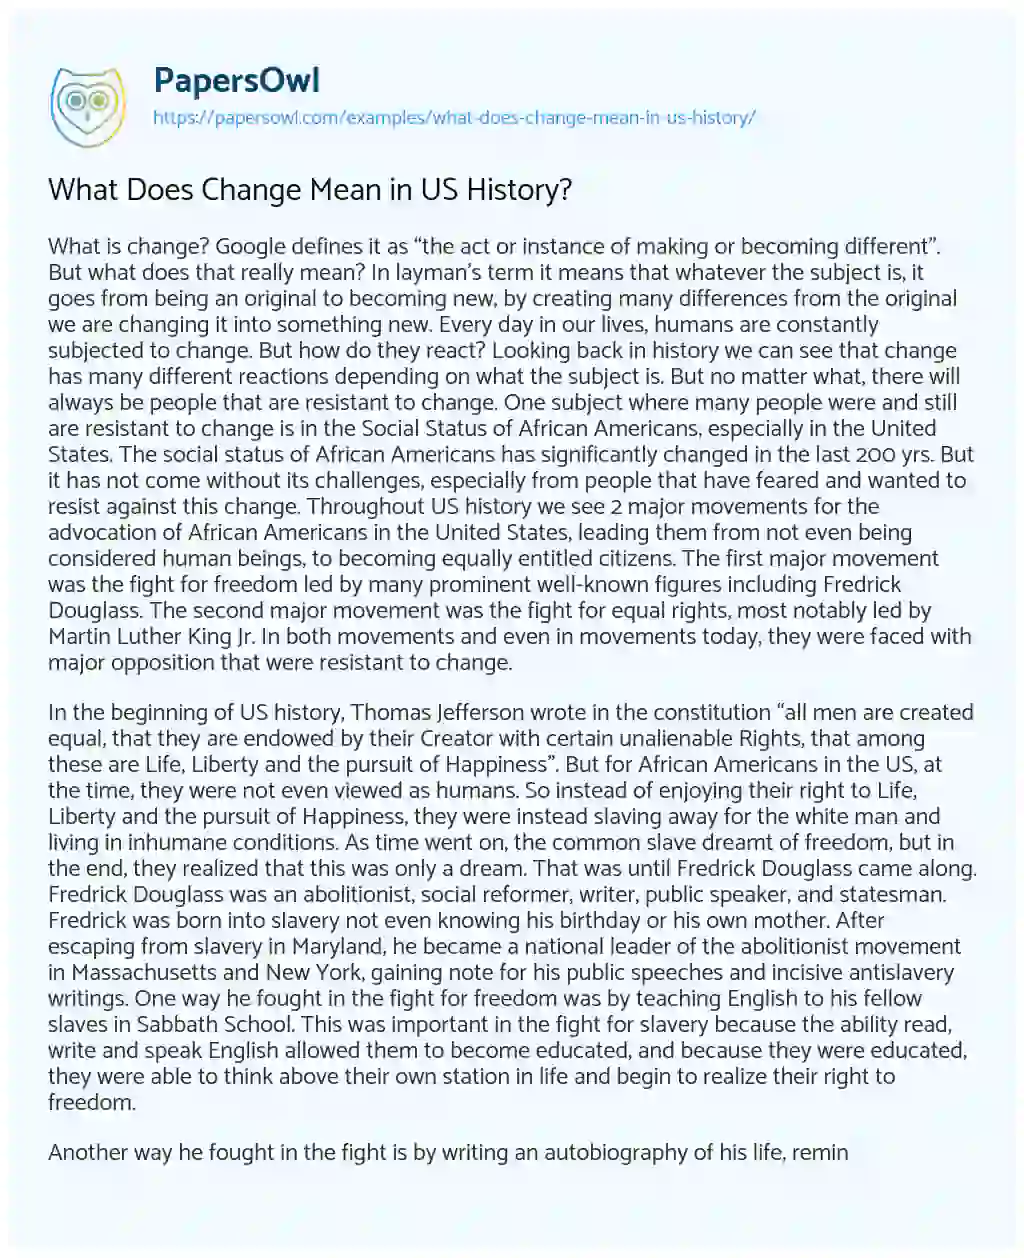 Essay on What does Change Mean in US History?